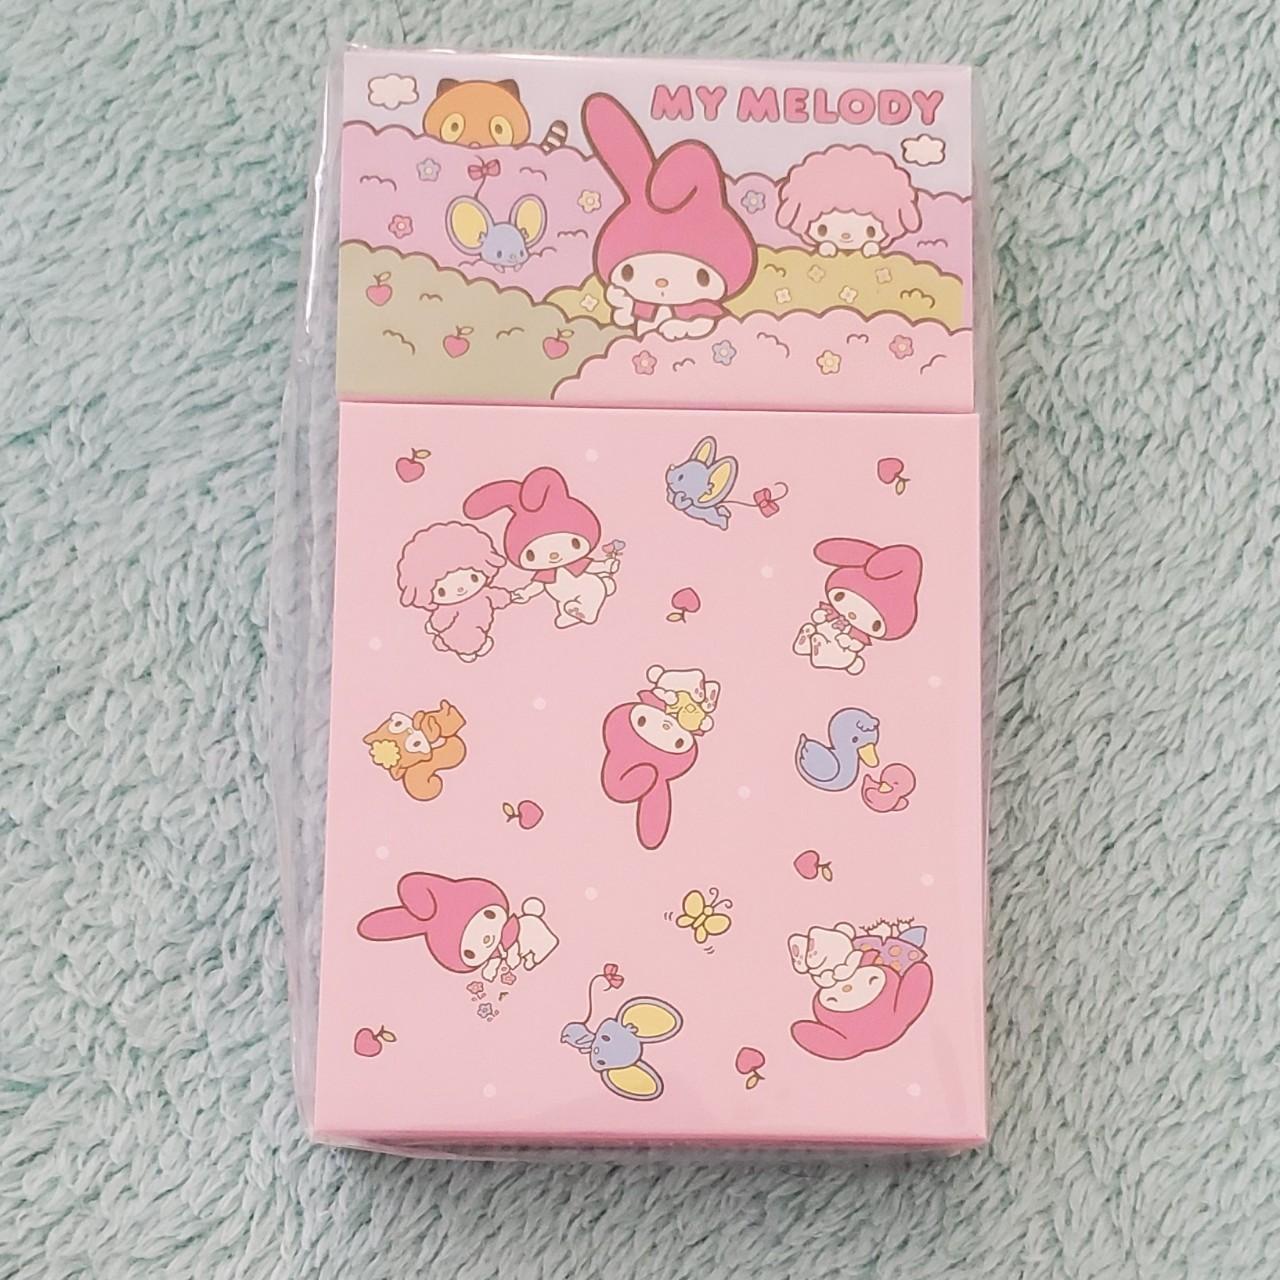 My melody clear pink organizer drawers🎀👛🌸 Can be - Depop